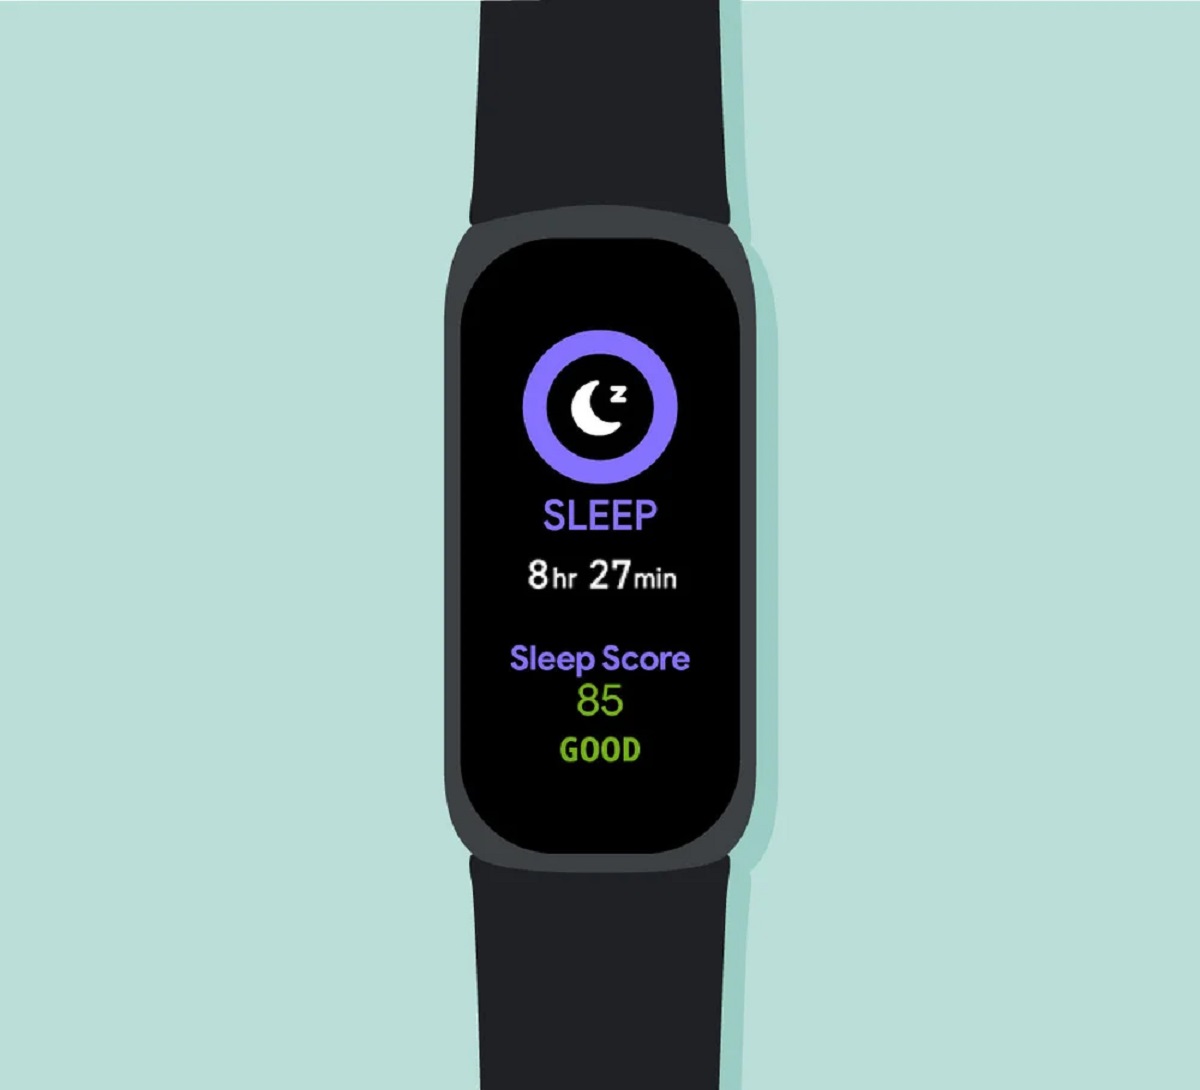 Sleep Score Snags: Troubleshooting Issues With Fitbit Sleep Score